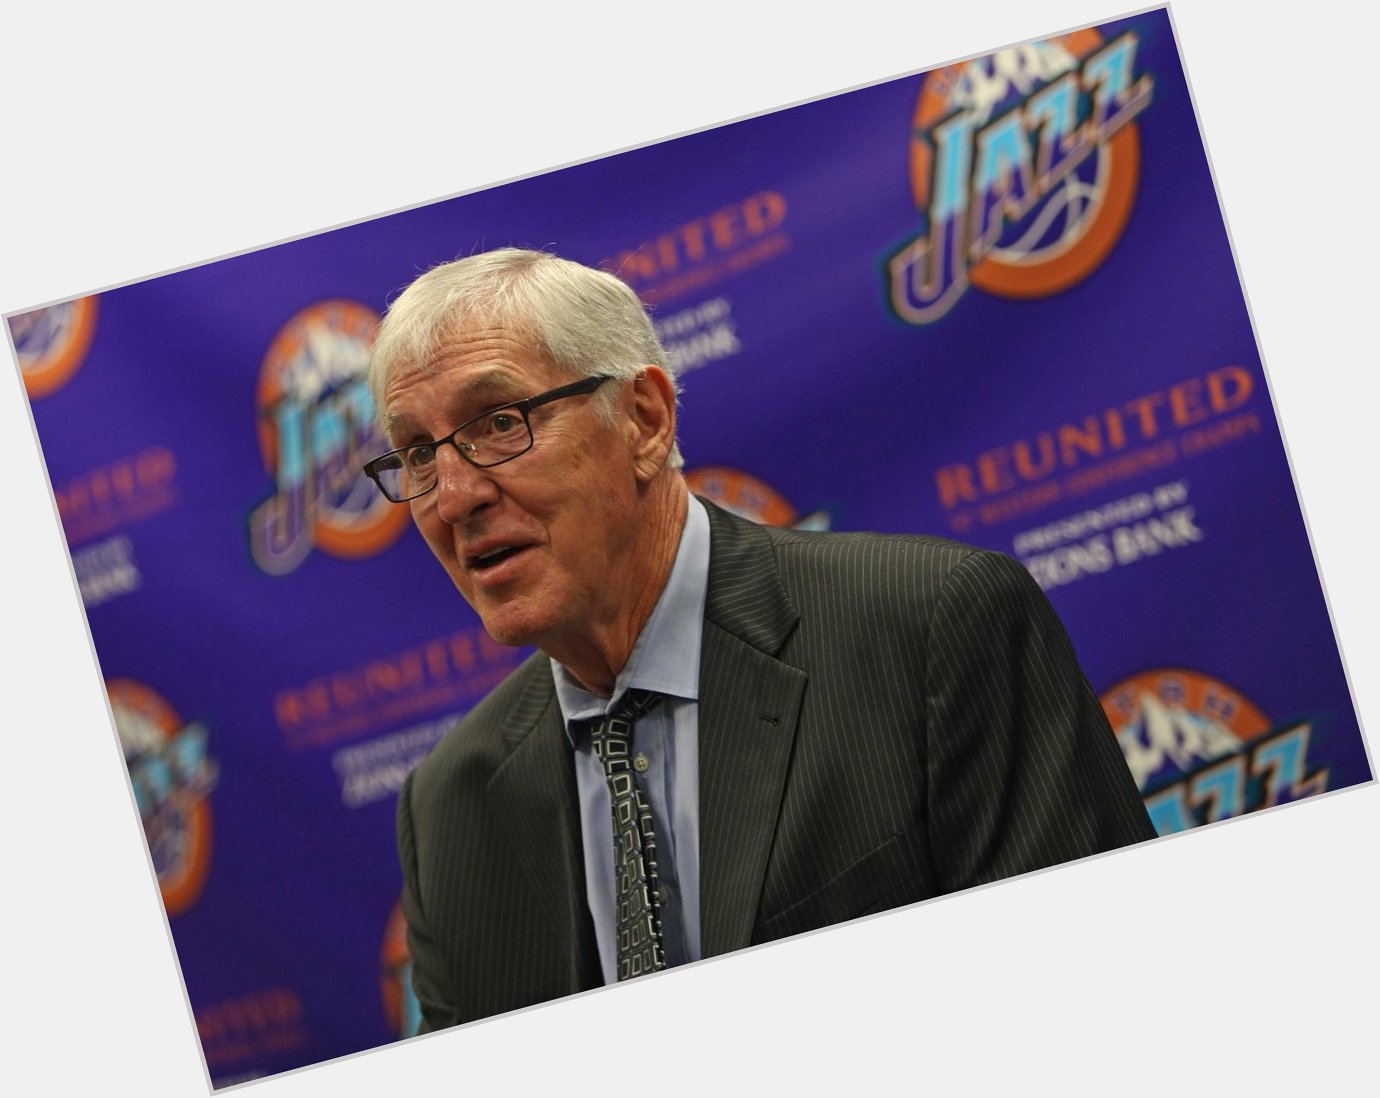 NBATV: Happy 75th Birthday to Hall of Fame Coach Jerry Sloan! 

MORE: 